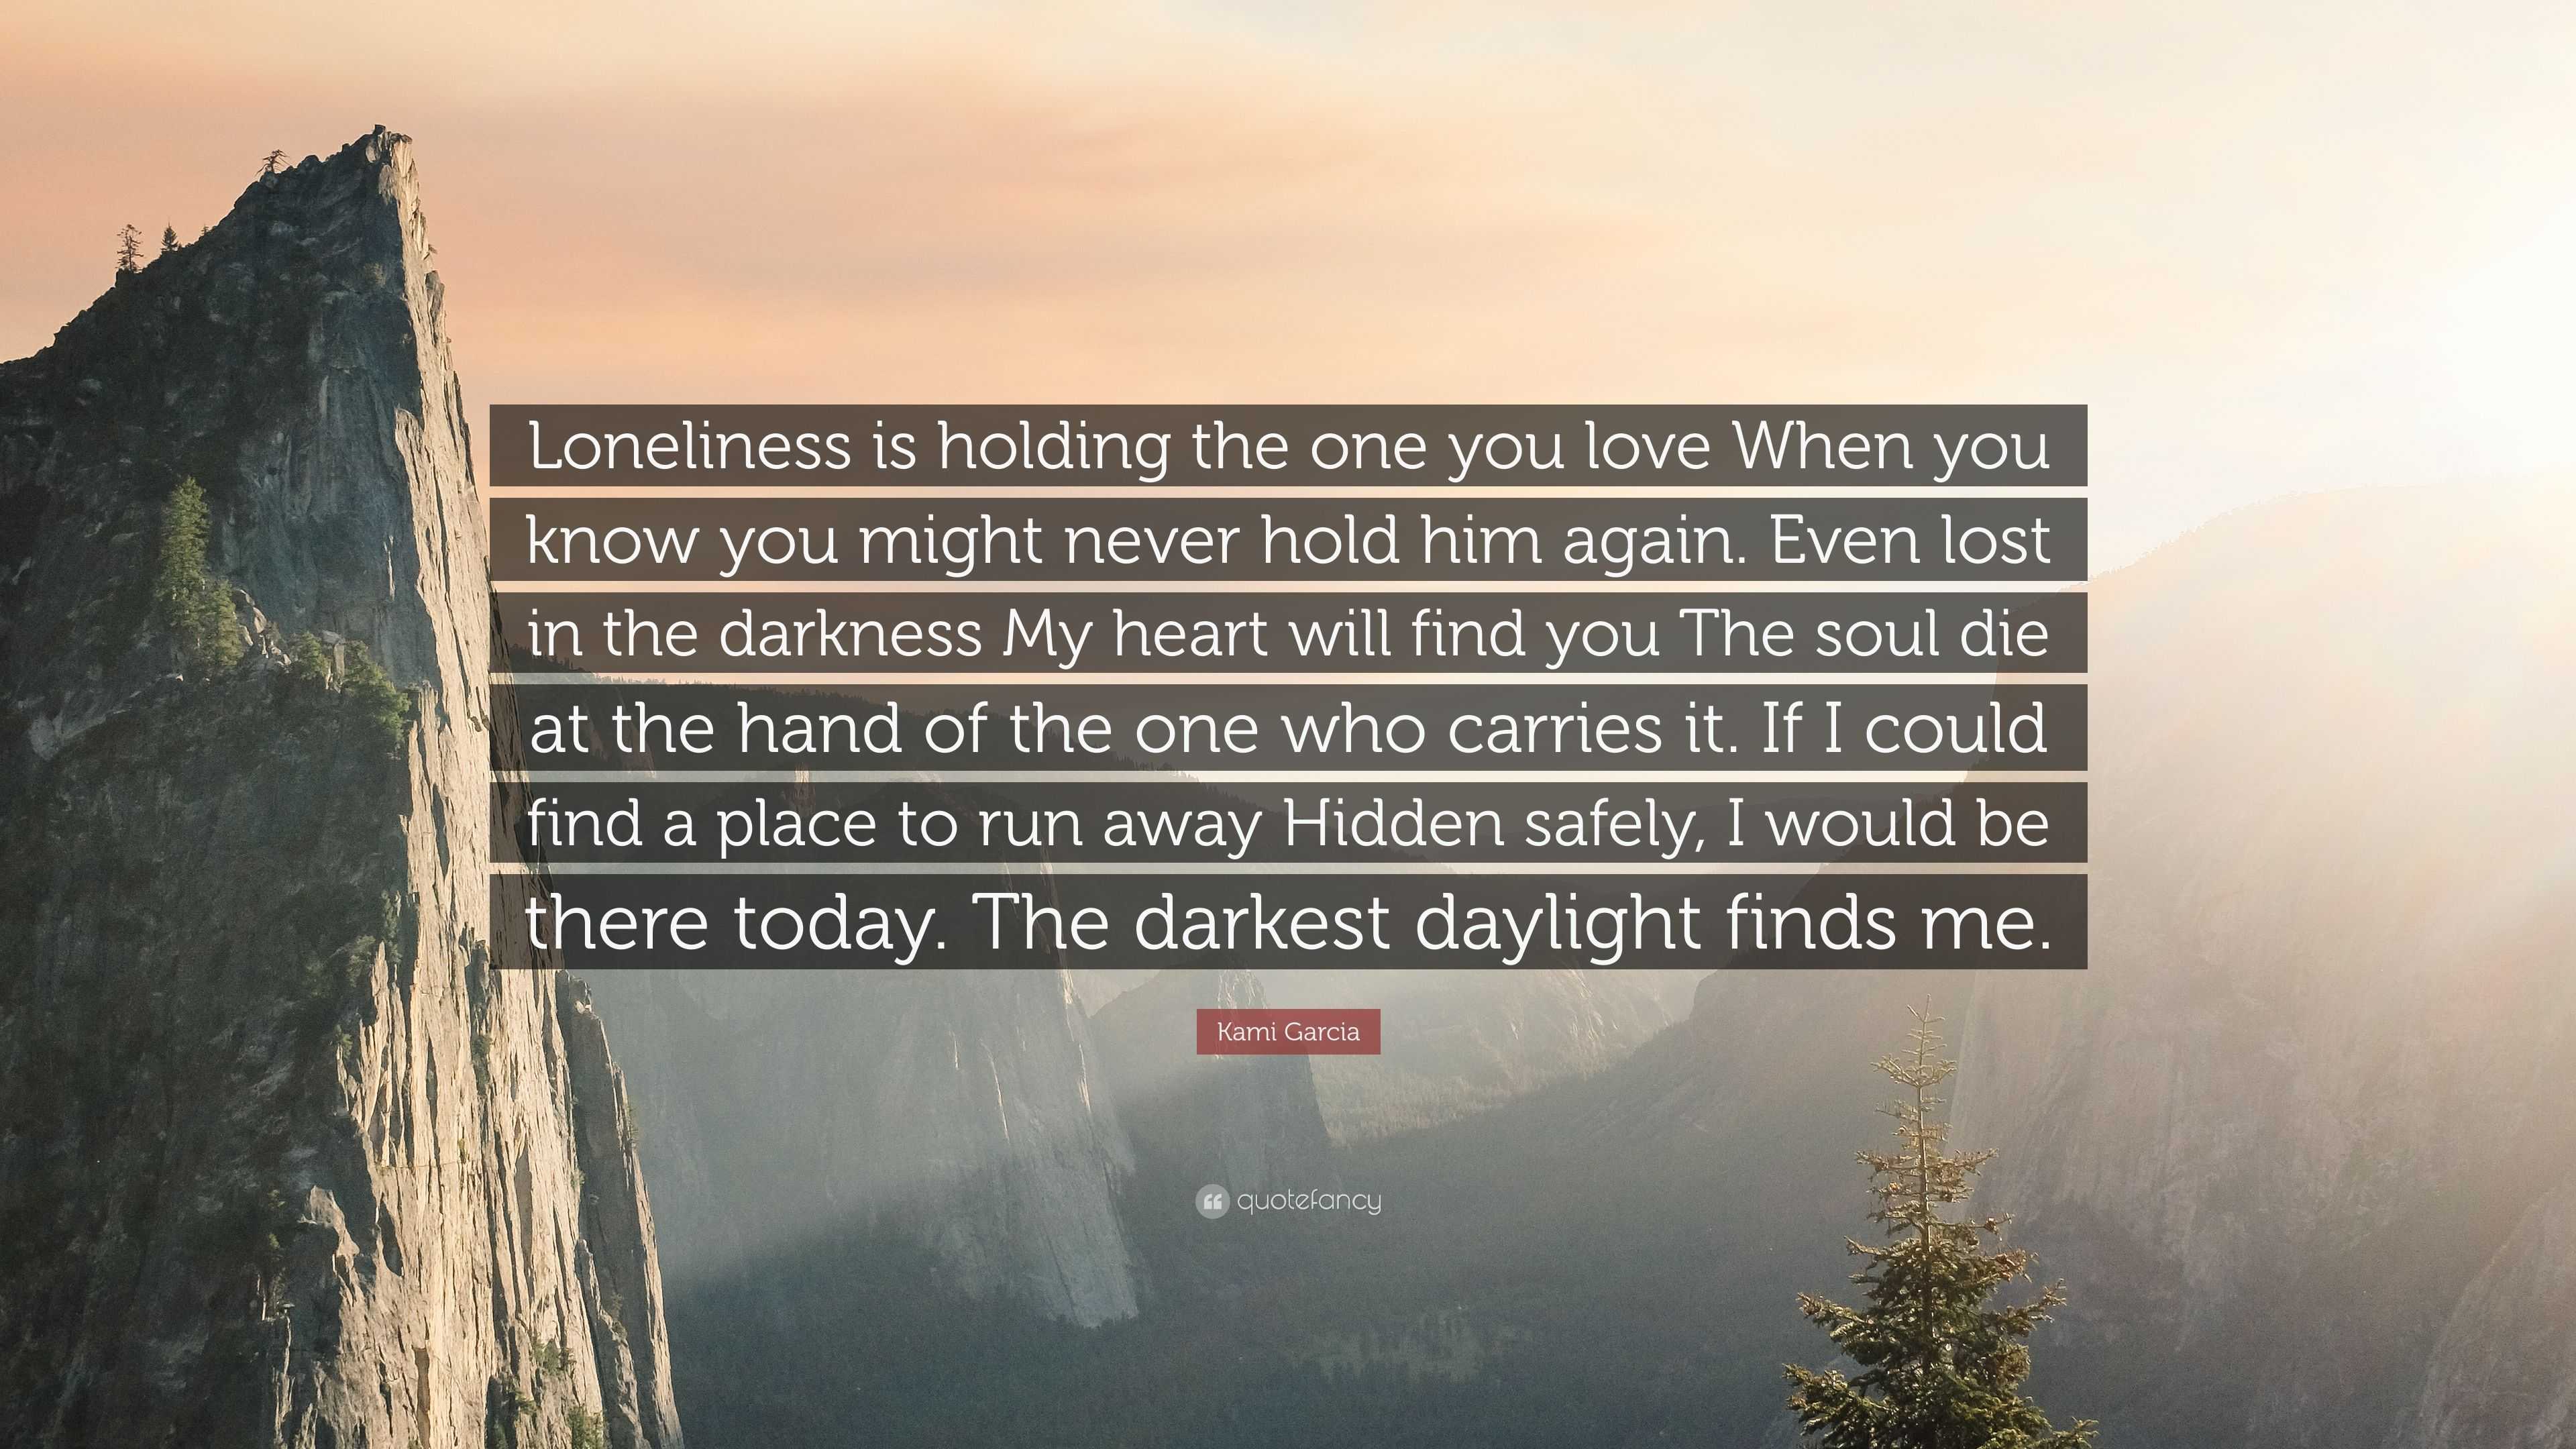 Kami Garcia Quote “Loneliness is holding the one you love When you know you